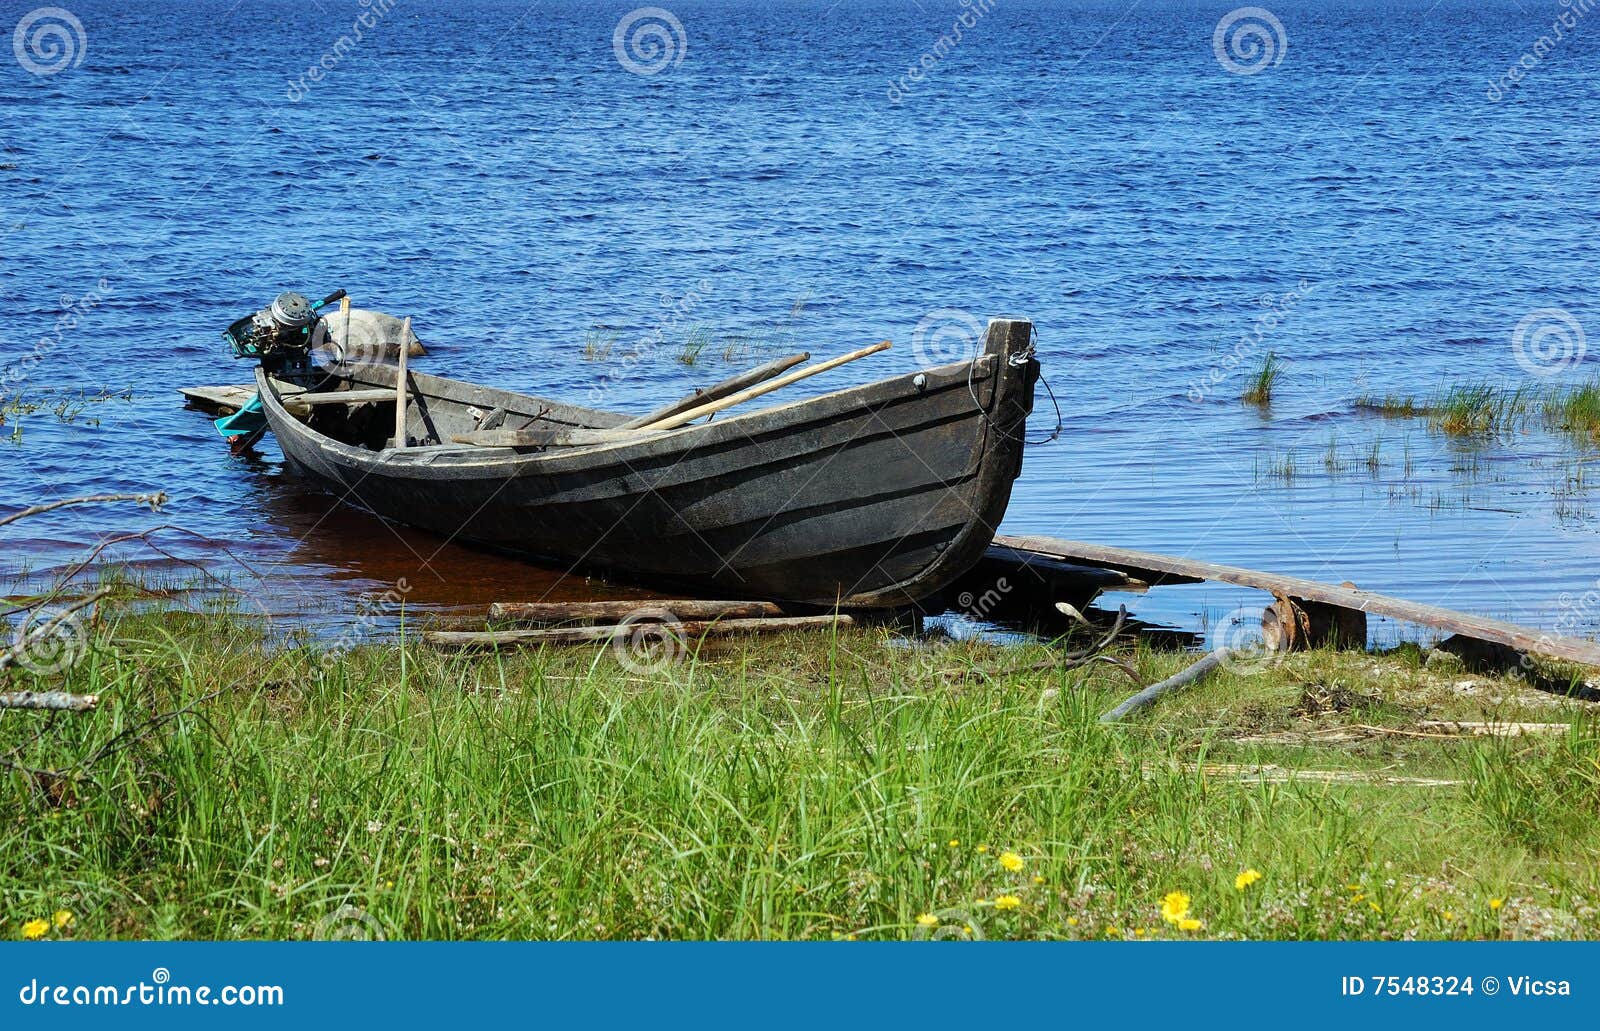 Old Wooden Fishing Motor Boat By The Lake Bank Stock Images - Image ...